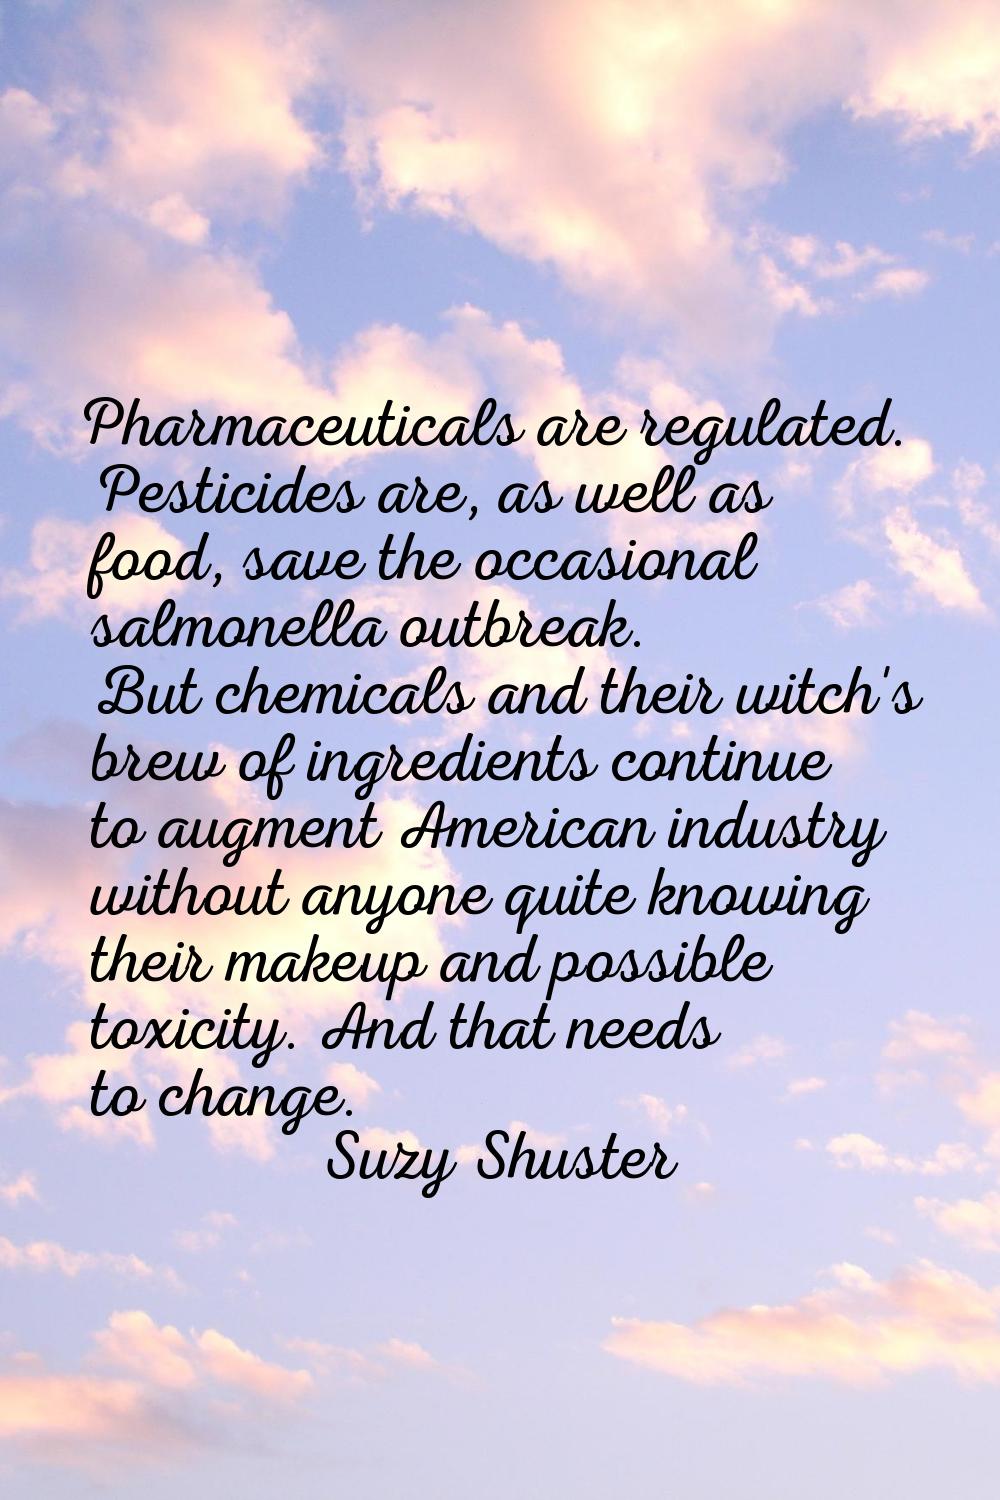 Pharmaceuticals are regulated. Pesticides are, as well as food, save the occasional salmonella outb